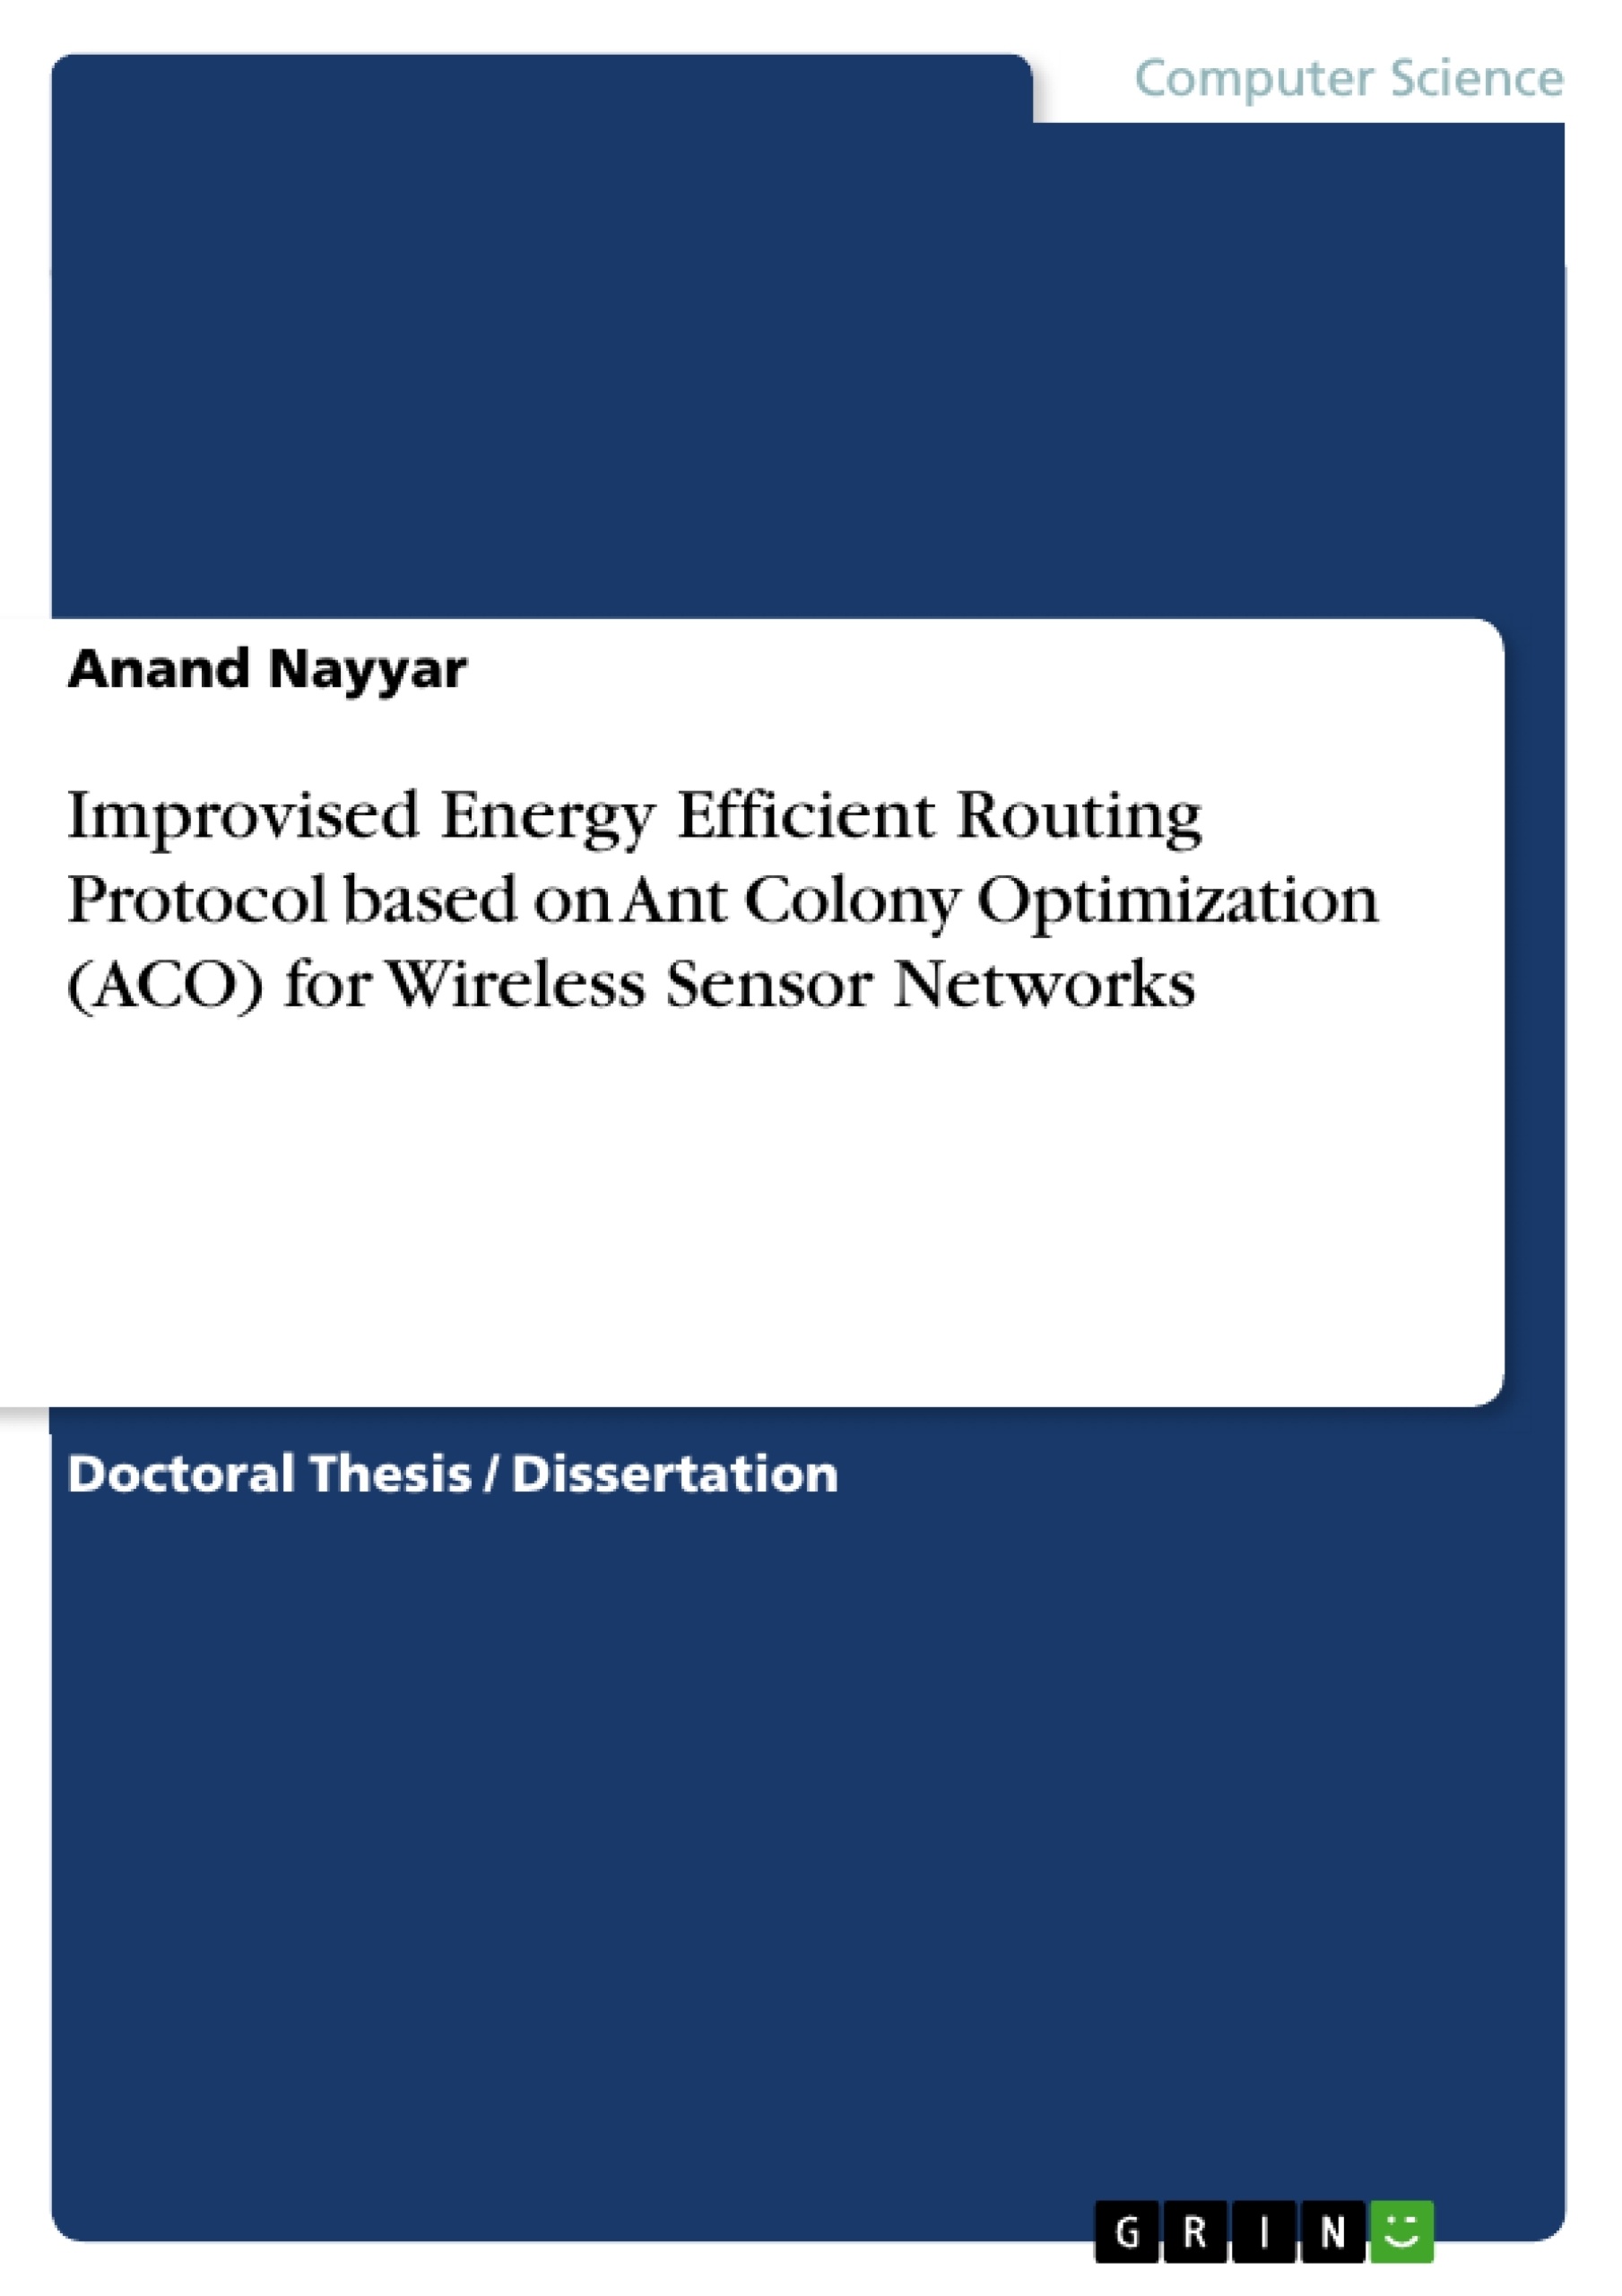 Title: Improvised Energy Efficient Routing Protocol based on Ant Colony Optimization (ACO) for Wireless Sensor Networks